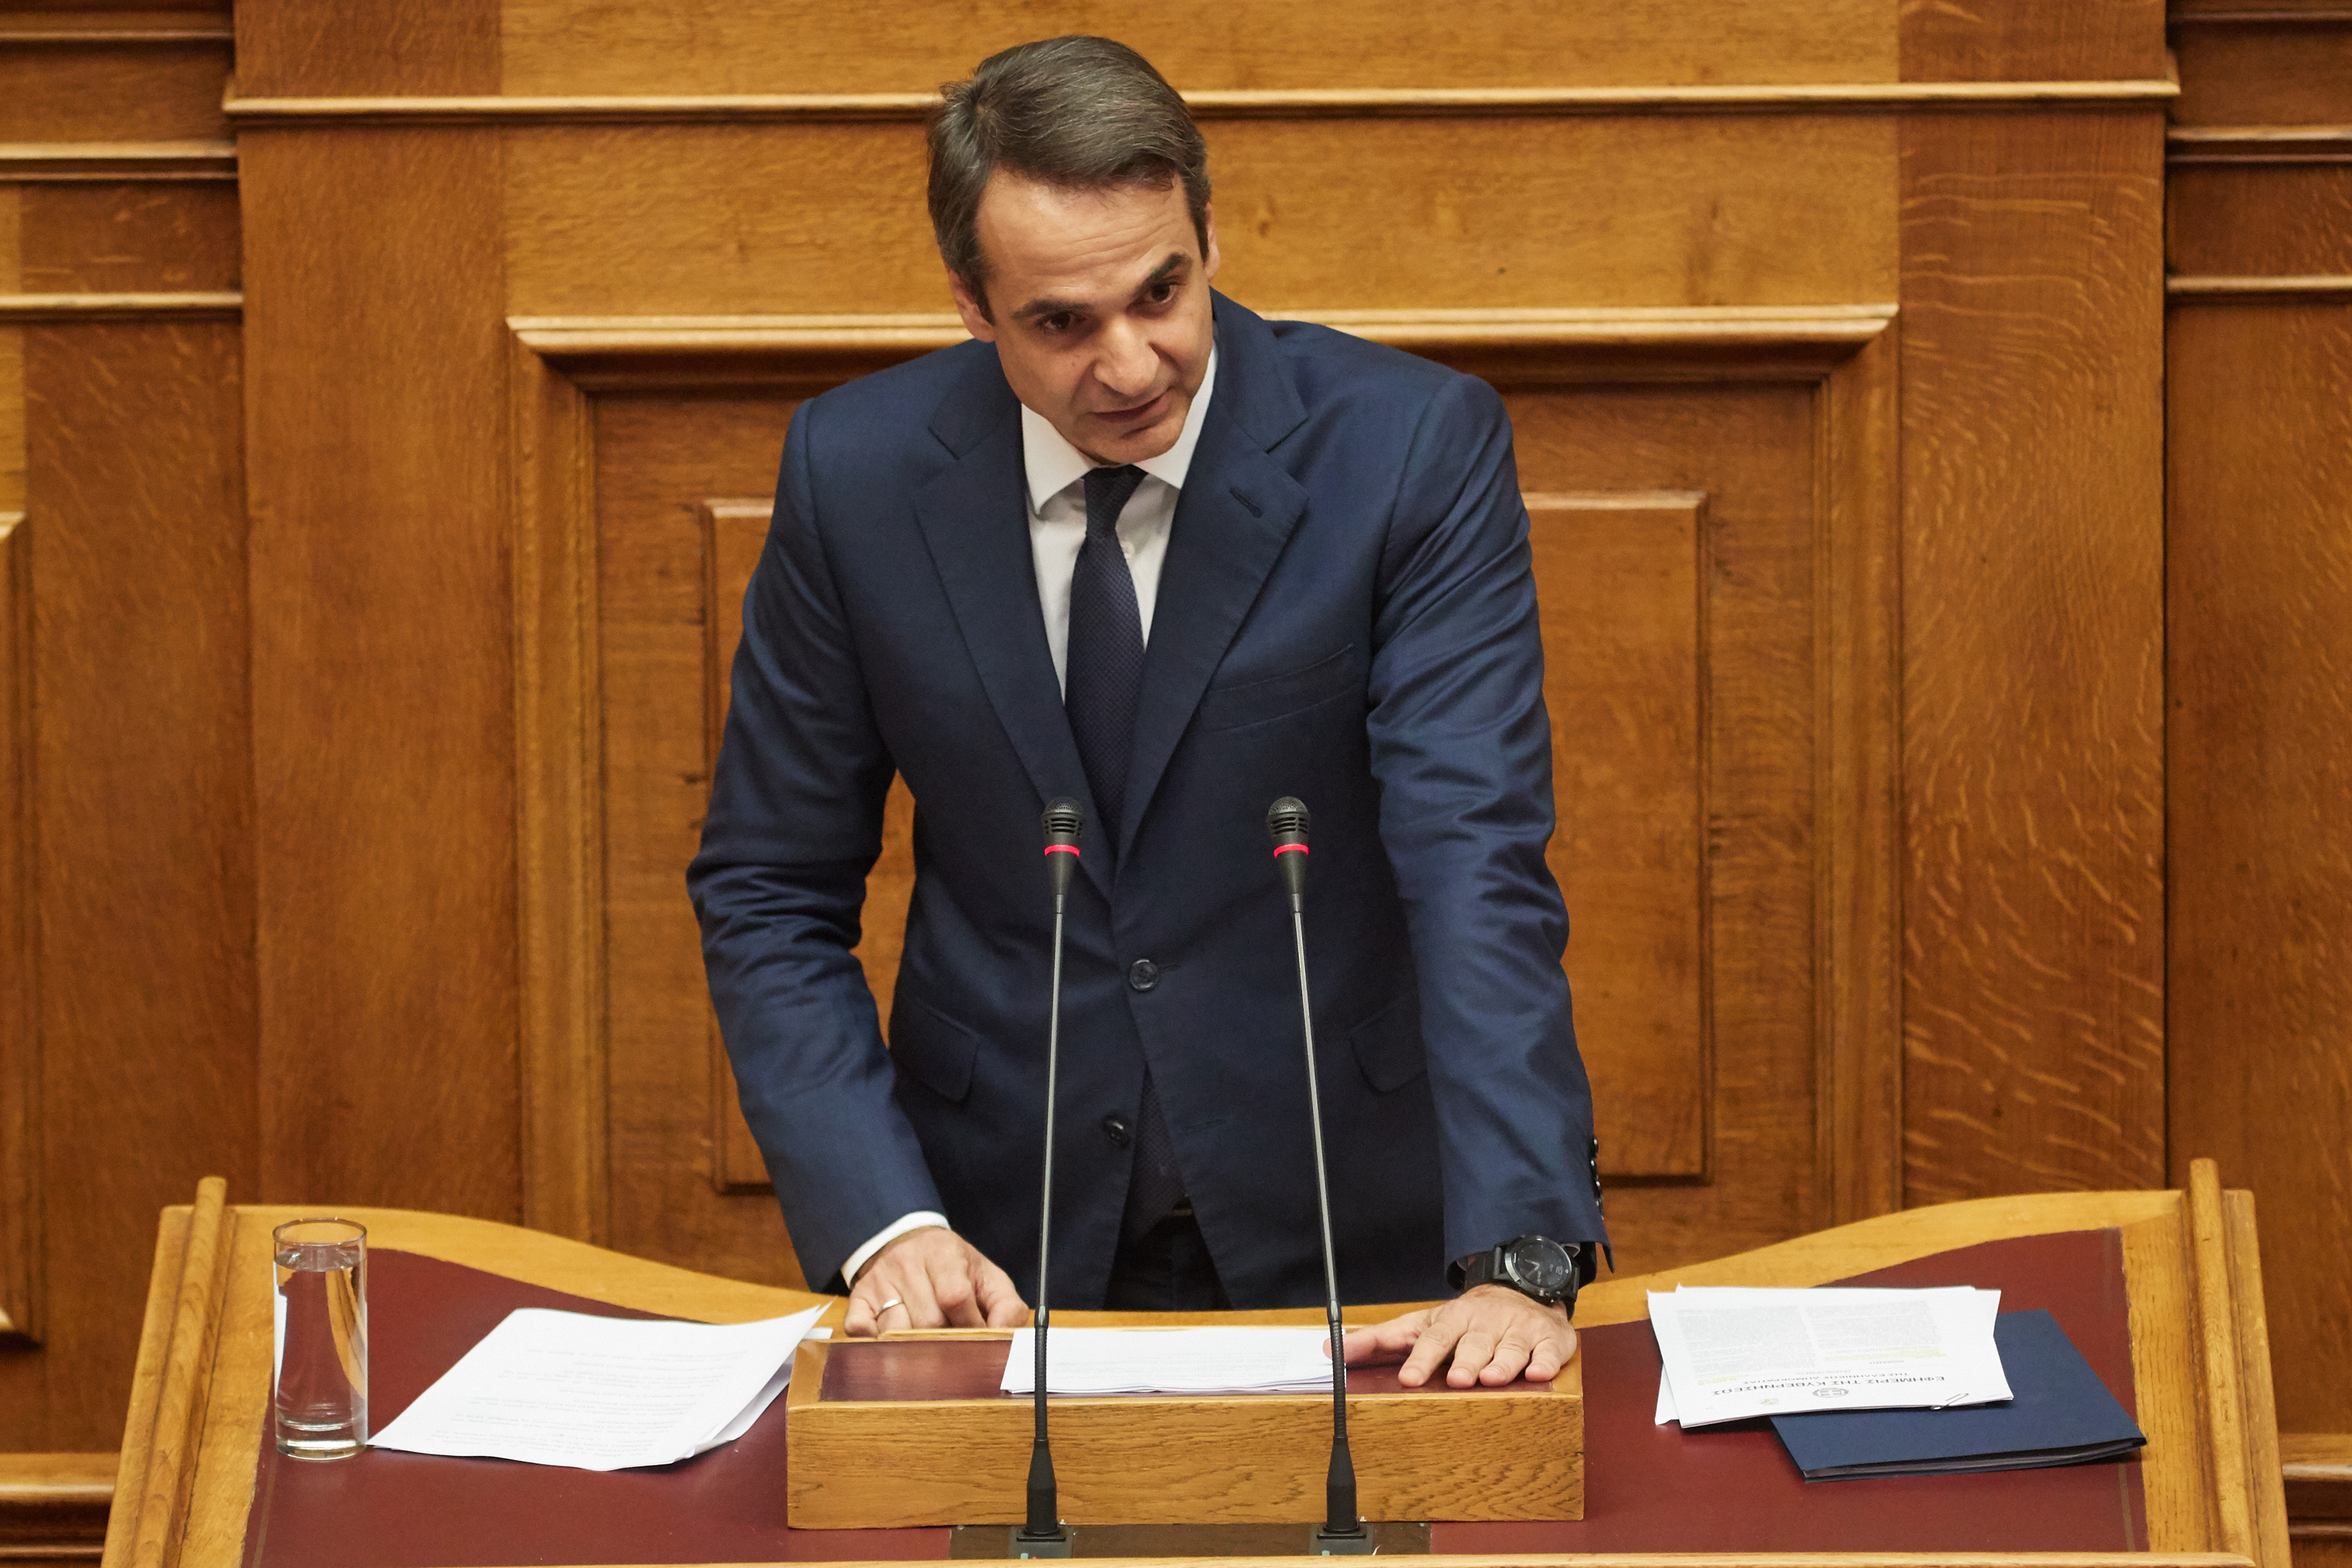 Tsipras, Mitsotakis clash over policy, corruption